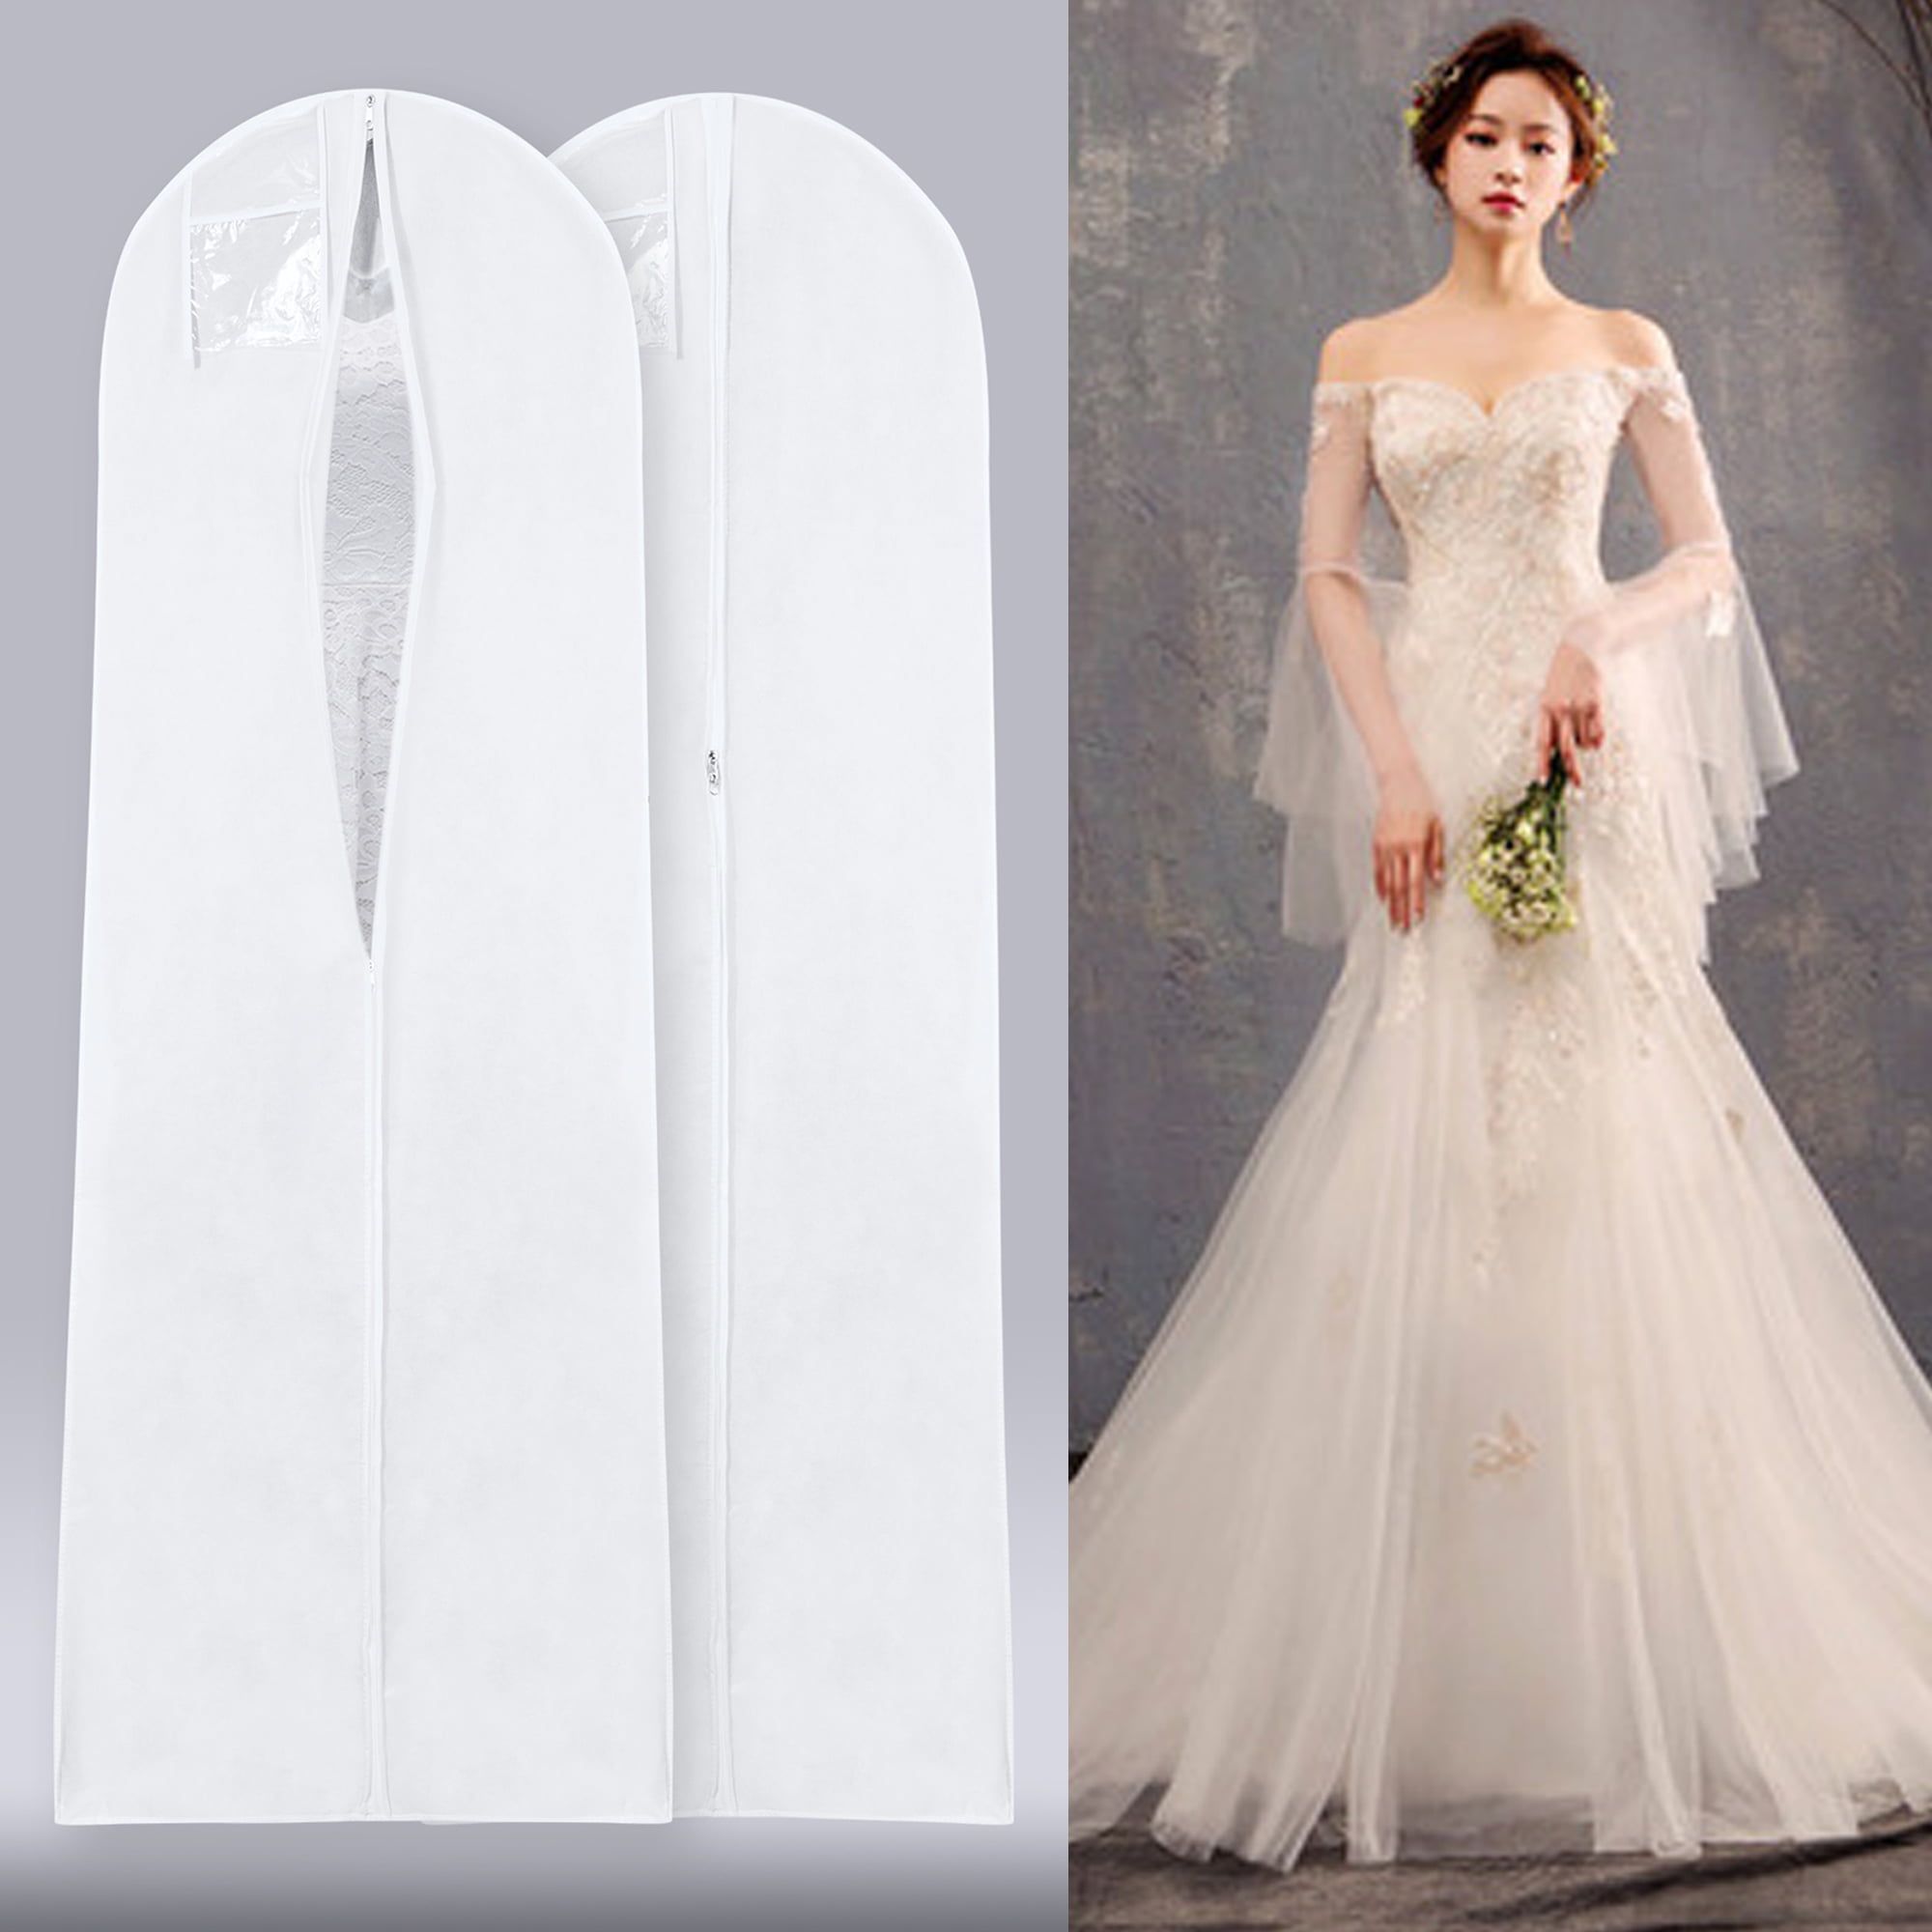 Large Bridal Gown Wedding Dress Storage Bag Breathable Garment Dust Proof Cover 